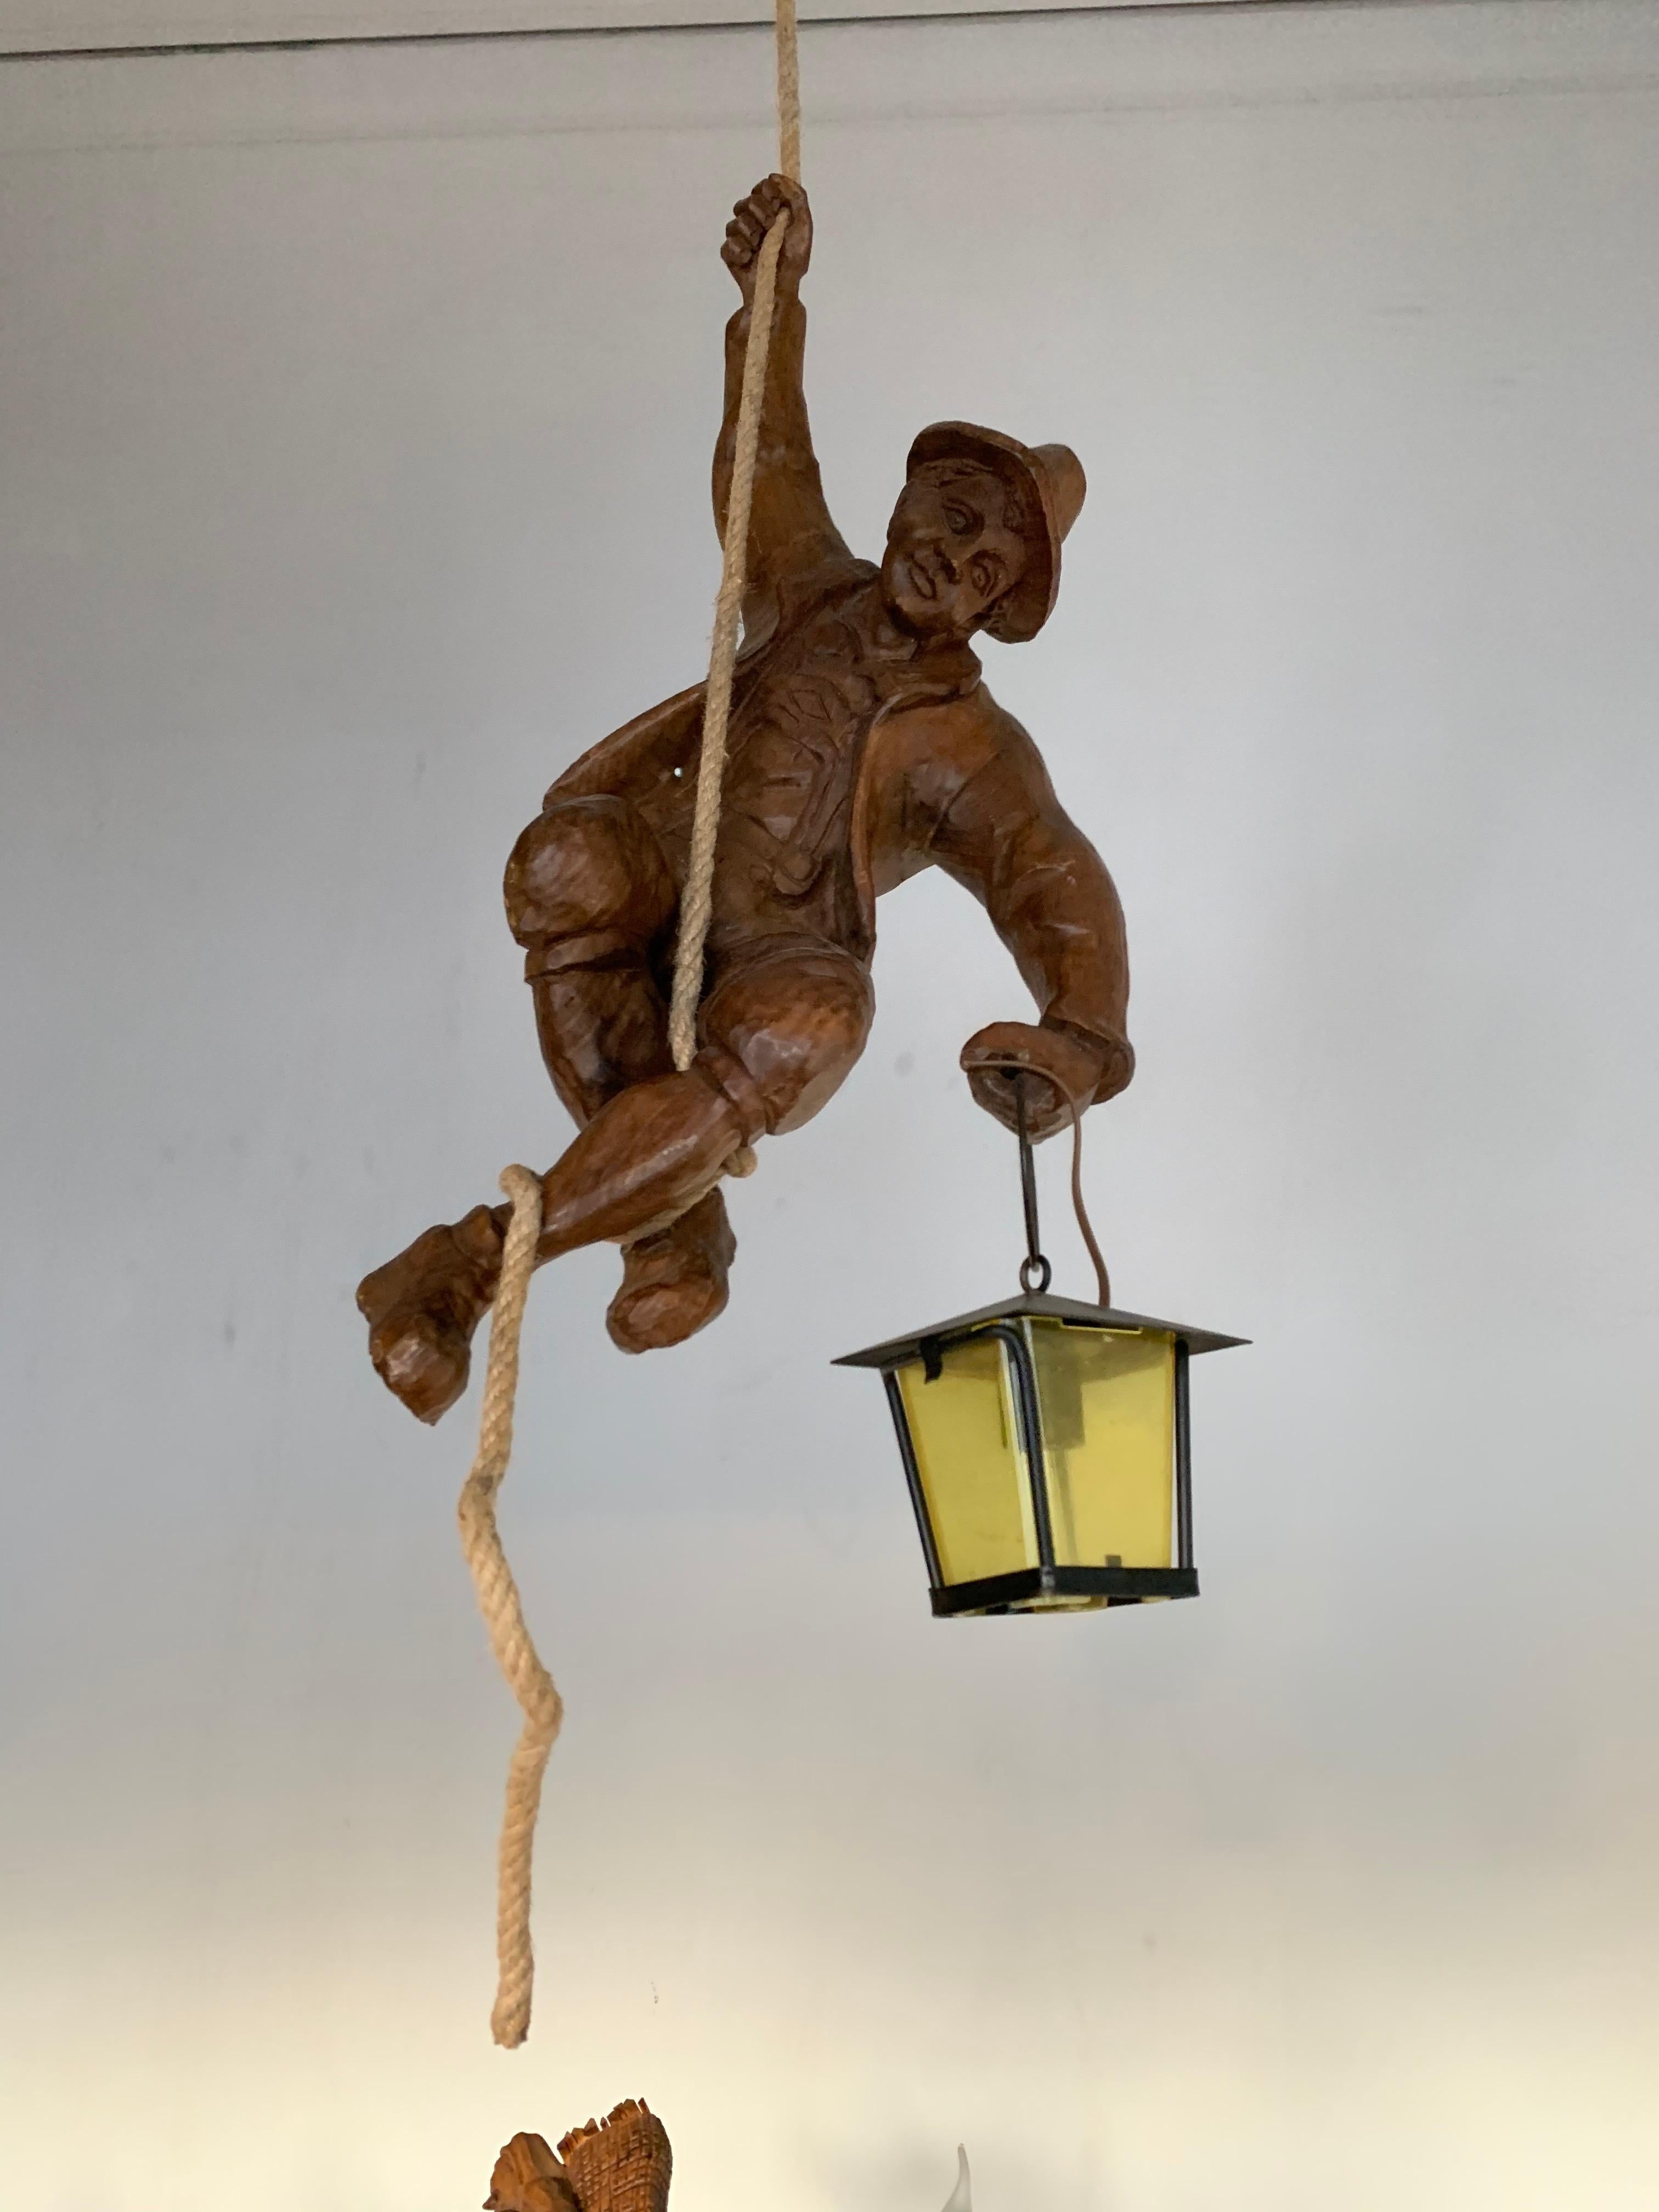 Austrian Vintage Hand Carved Wooden Mountaineer Sculpture Pendant Light with Lantern